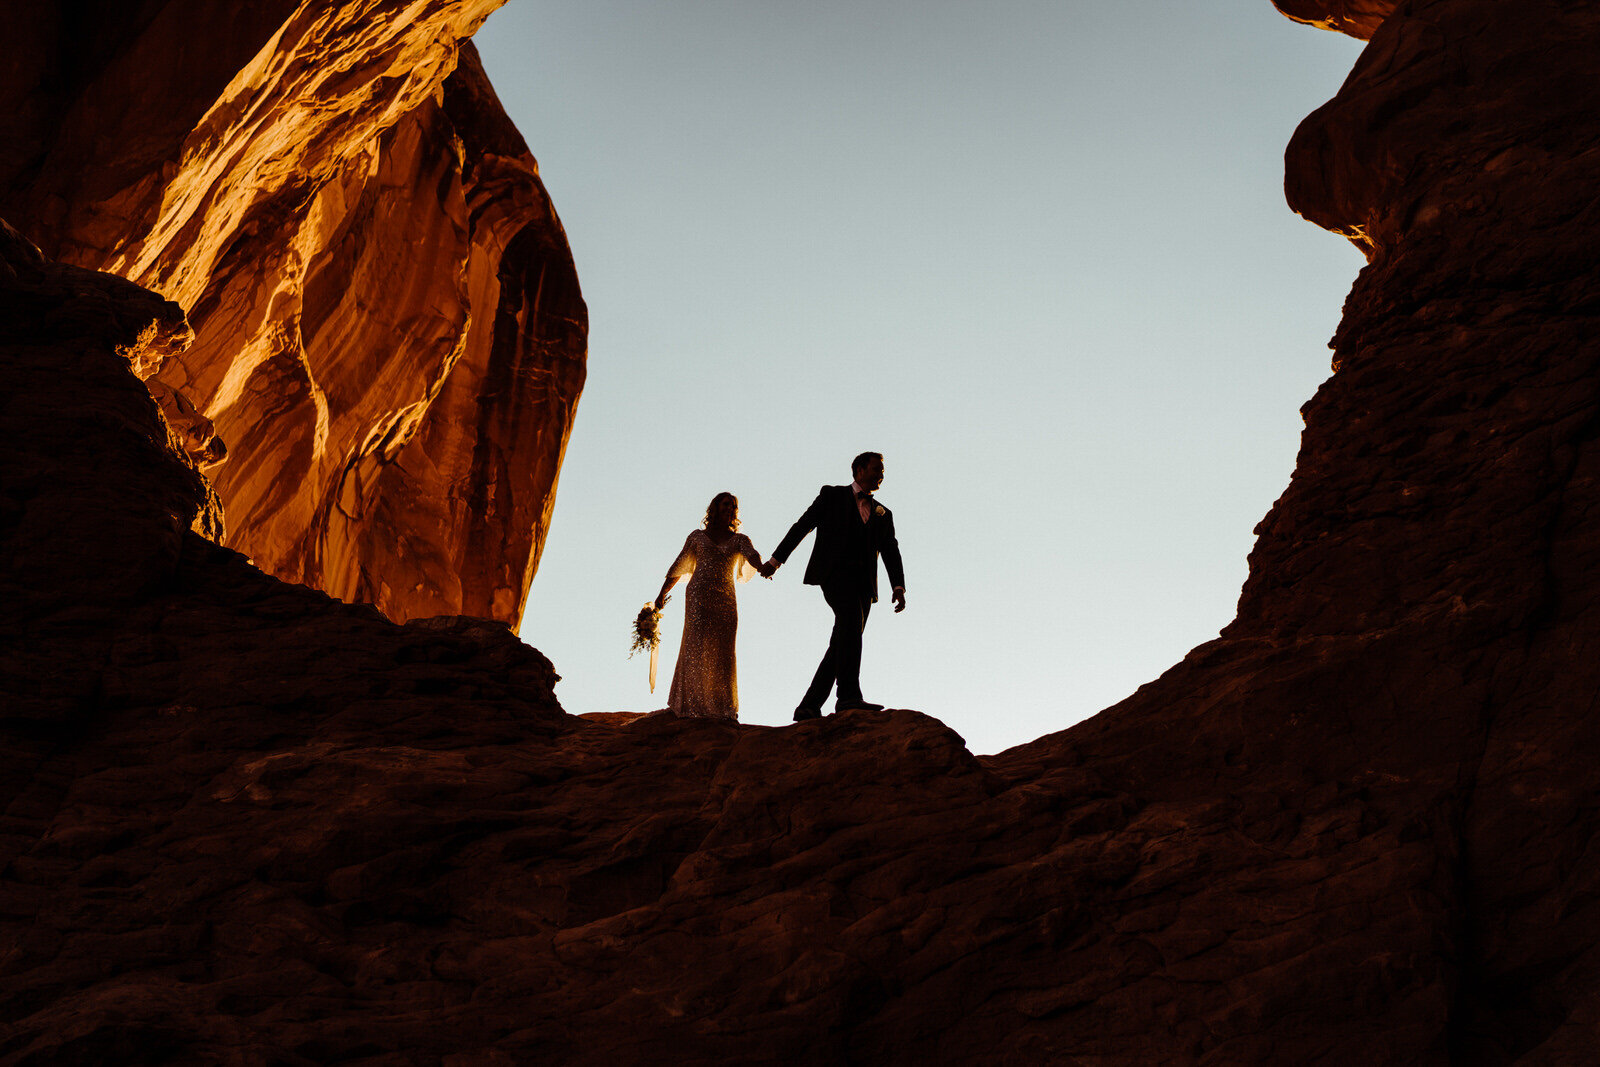 Arches-National-Park-Wedding-Silhouette-of-Bride-and-Groom-beneath-arch.jpg